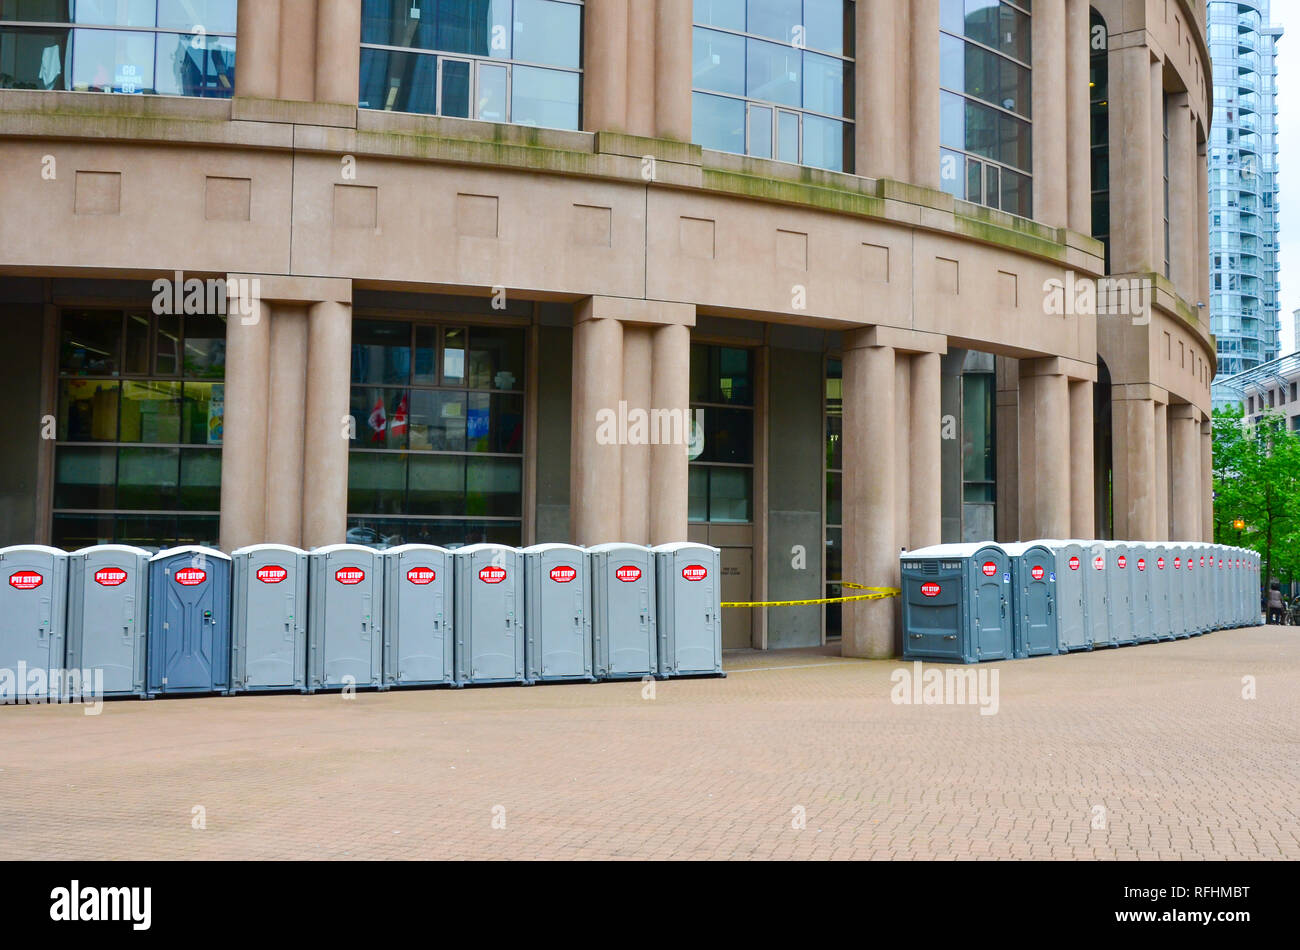 potties surround the Vancouver Public Library in preparation for an event in Vancouver, British Columbia, Canada. Stock Photo